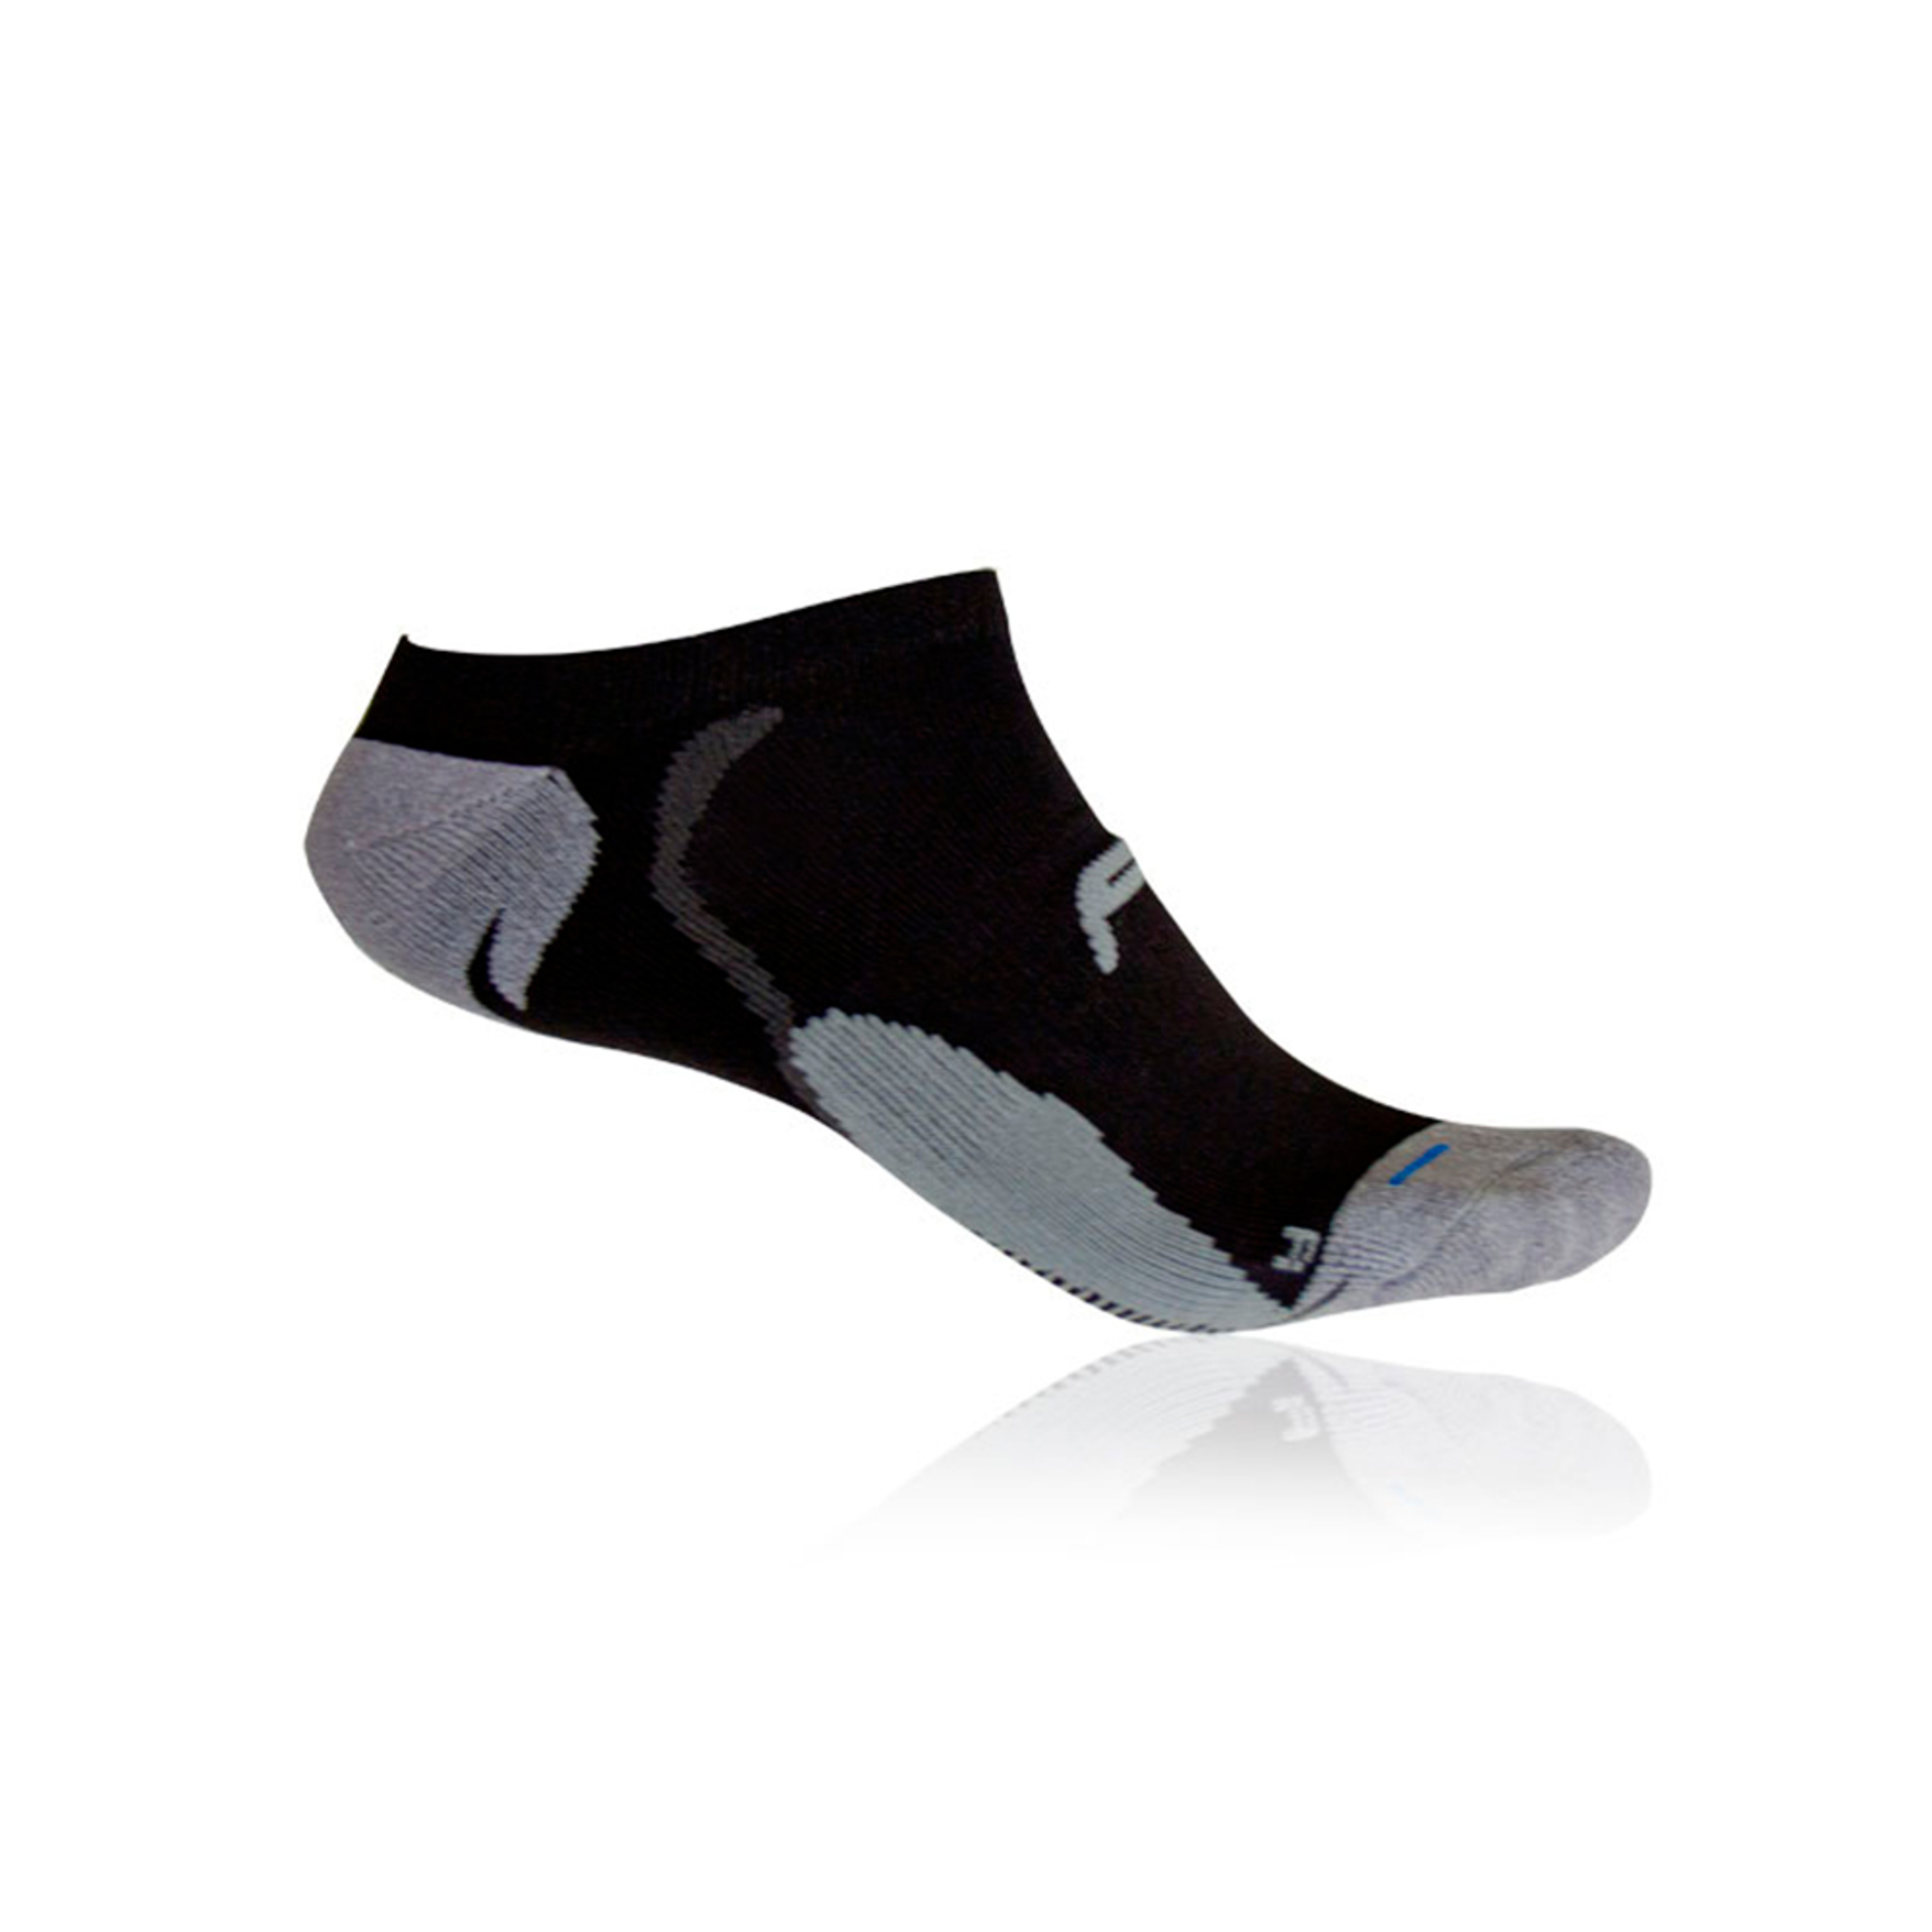 Calcetines Running Invisibles F-lite Ra 100 Microlon - Negro - Calcetines Transpirables  MKP